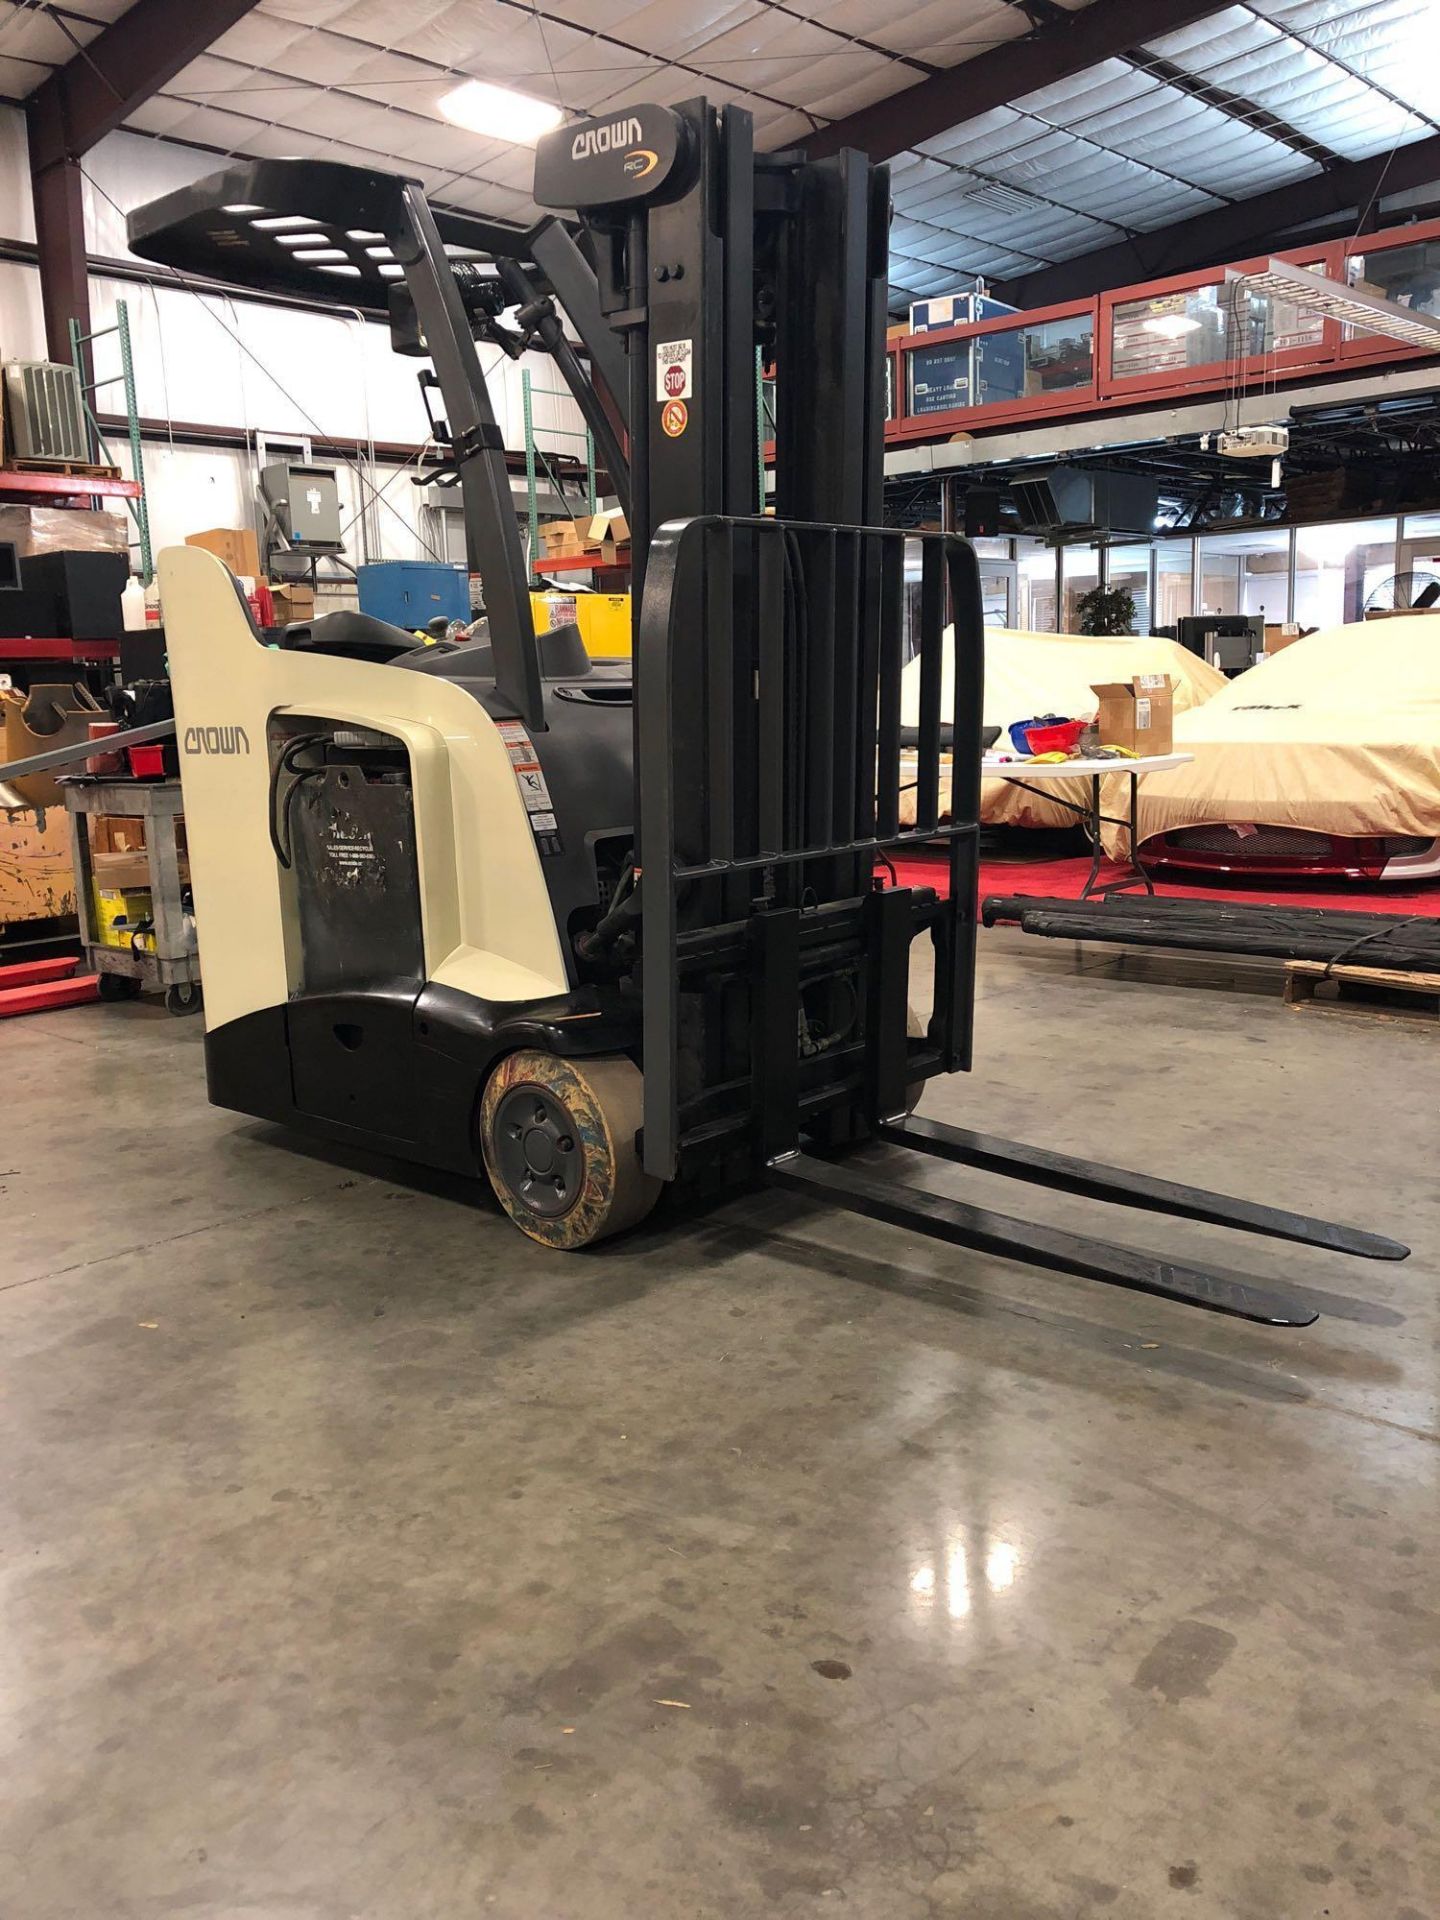 2012 CROWN ELECTRIC FORKLIFT MODEL RC5530-30 - Image 2 of 5